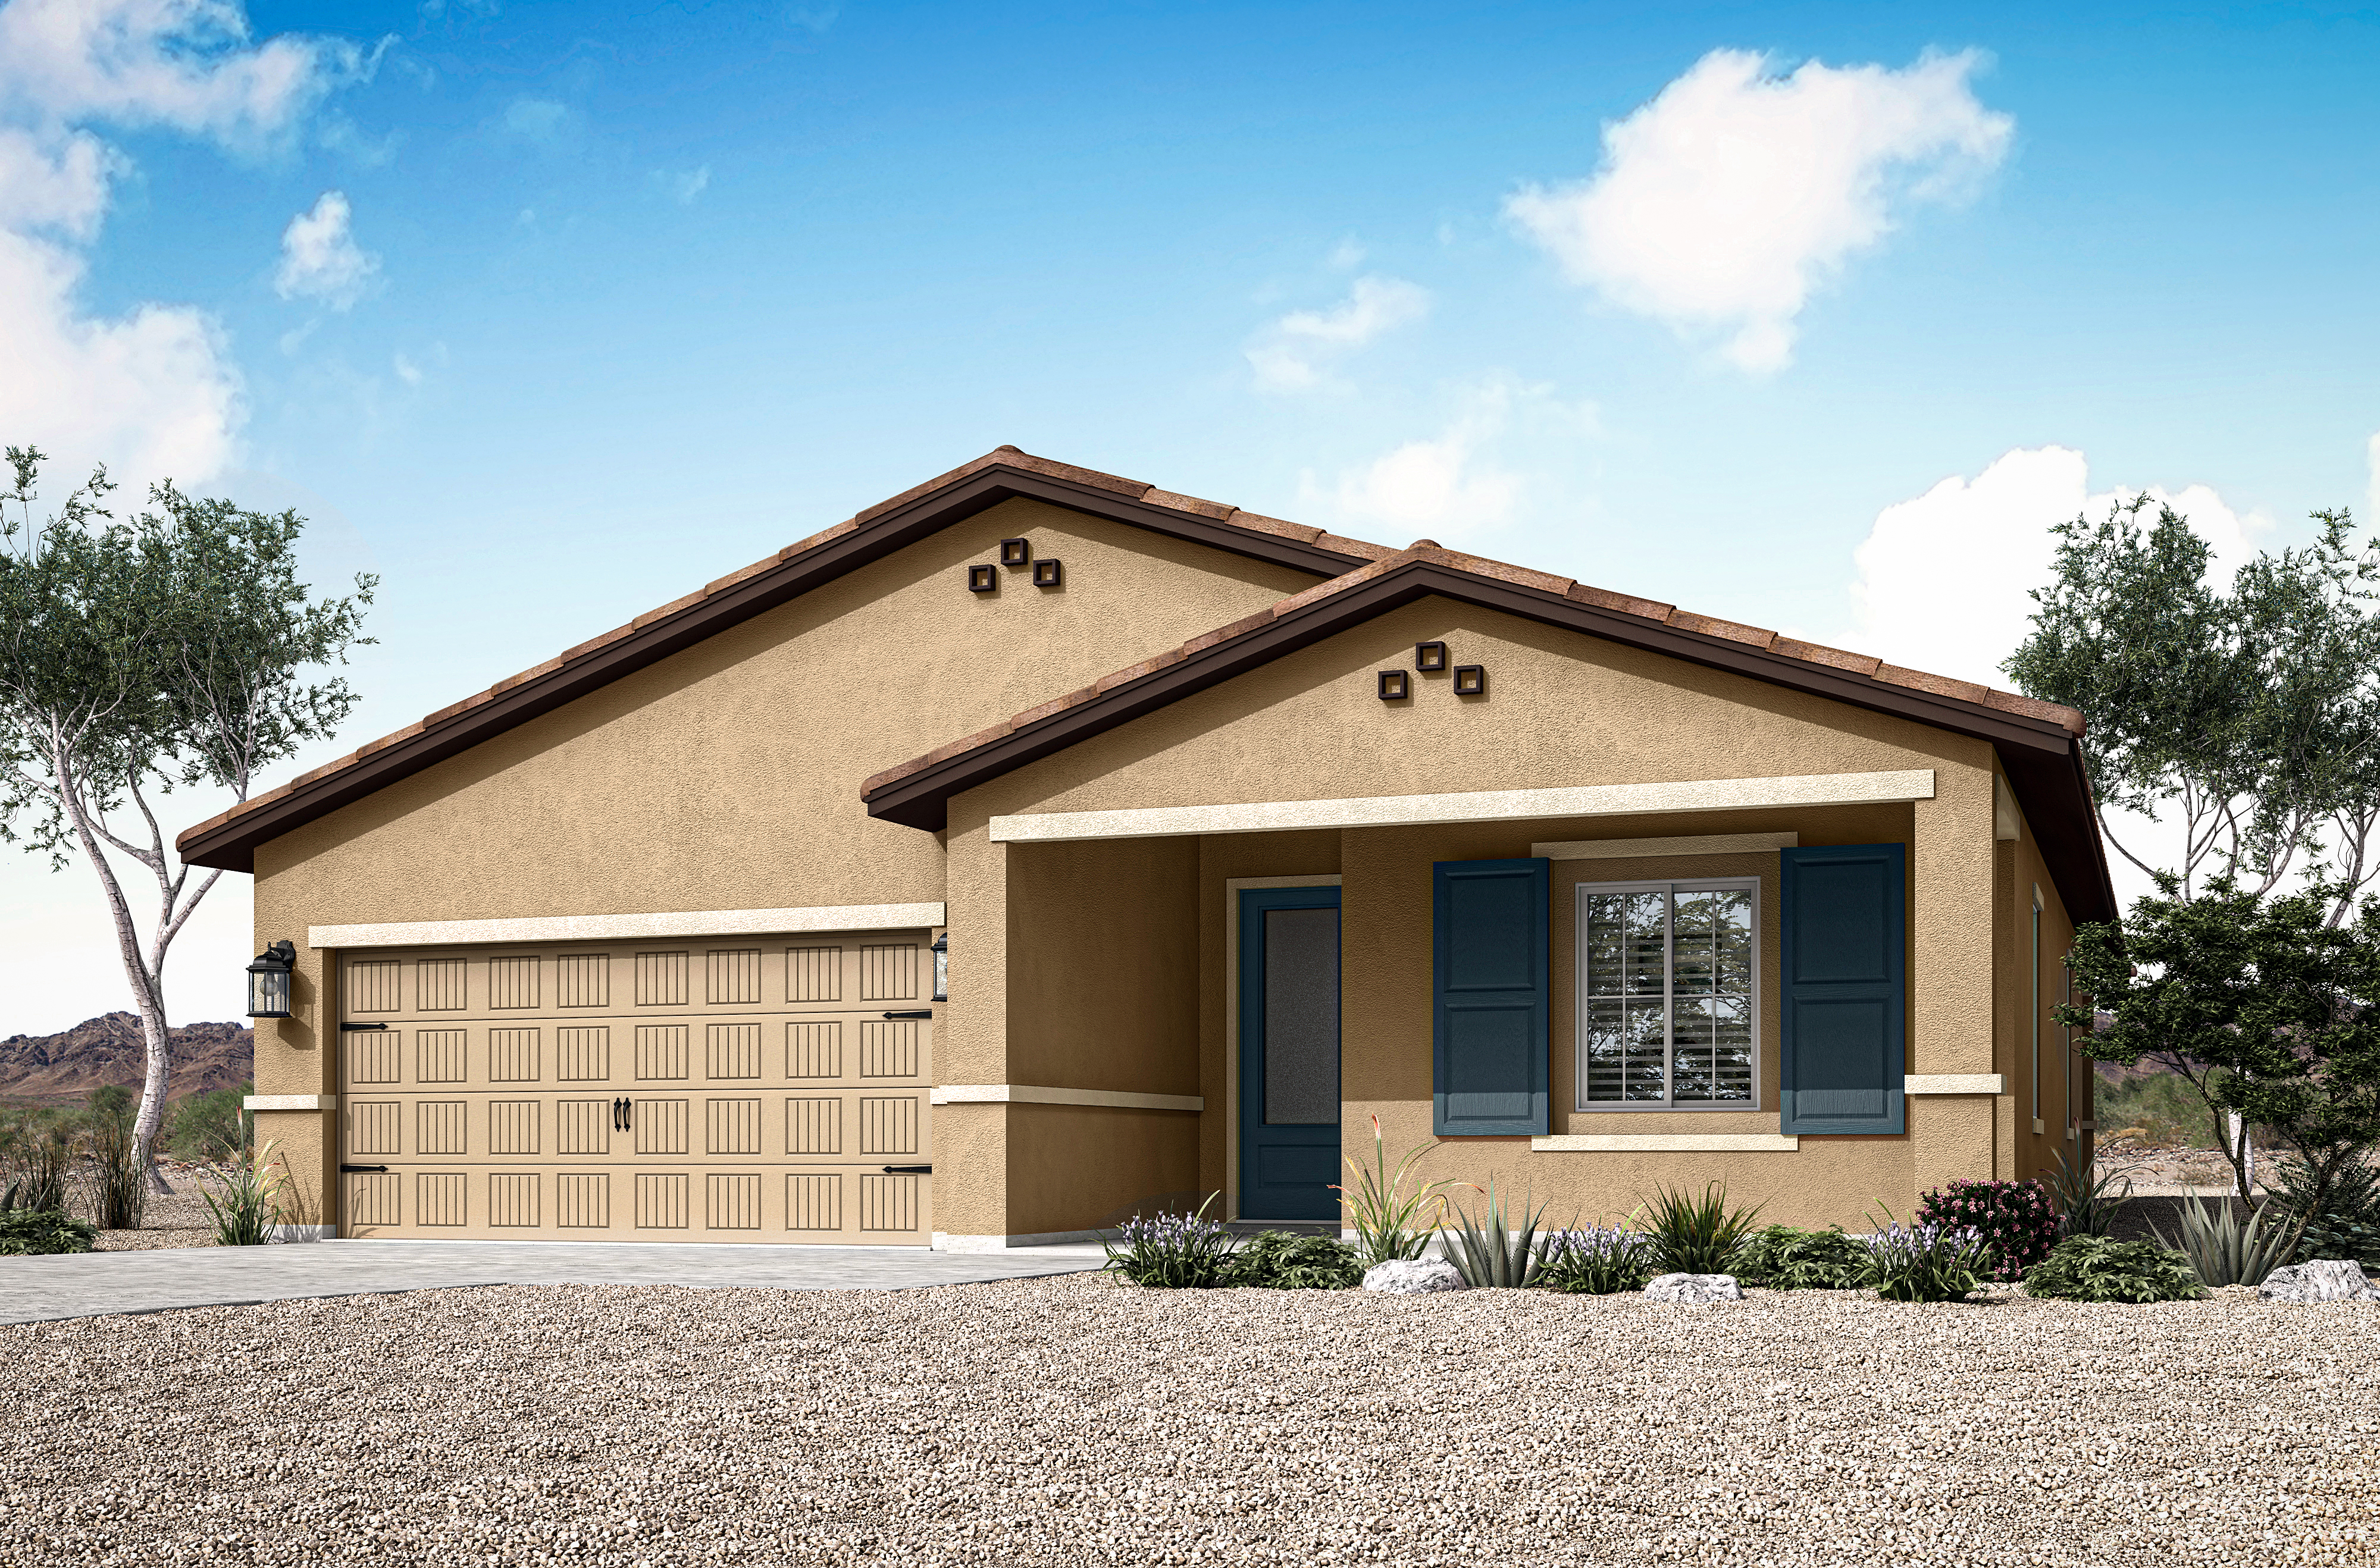 Artist rendering of the Del Mar plan located in Indio, CA.